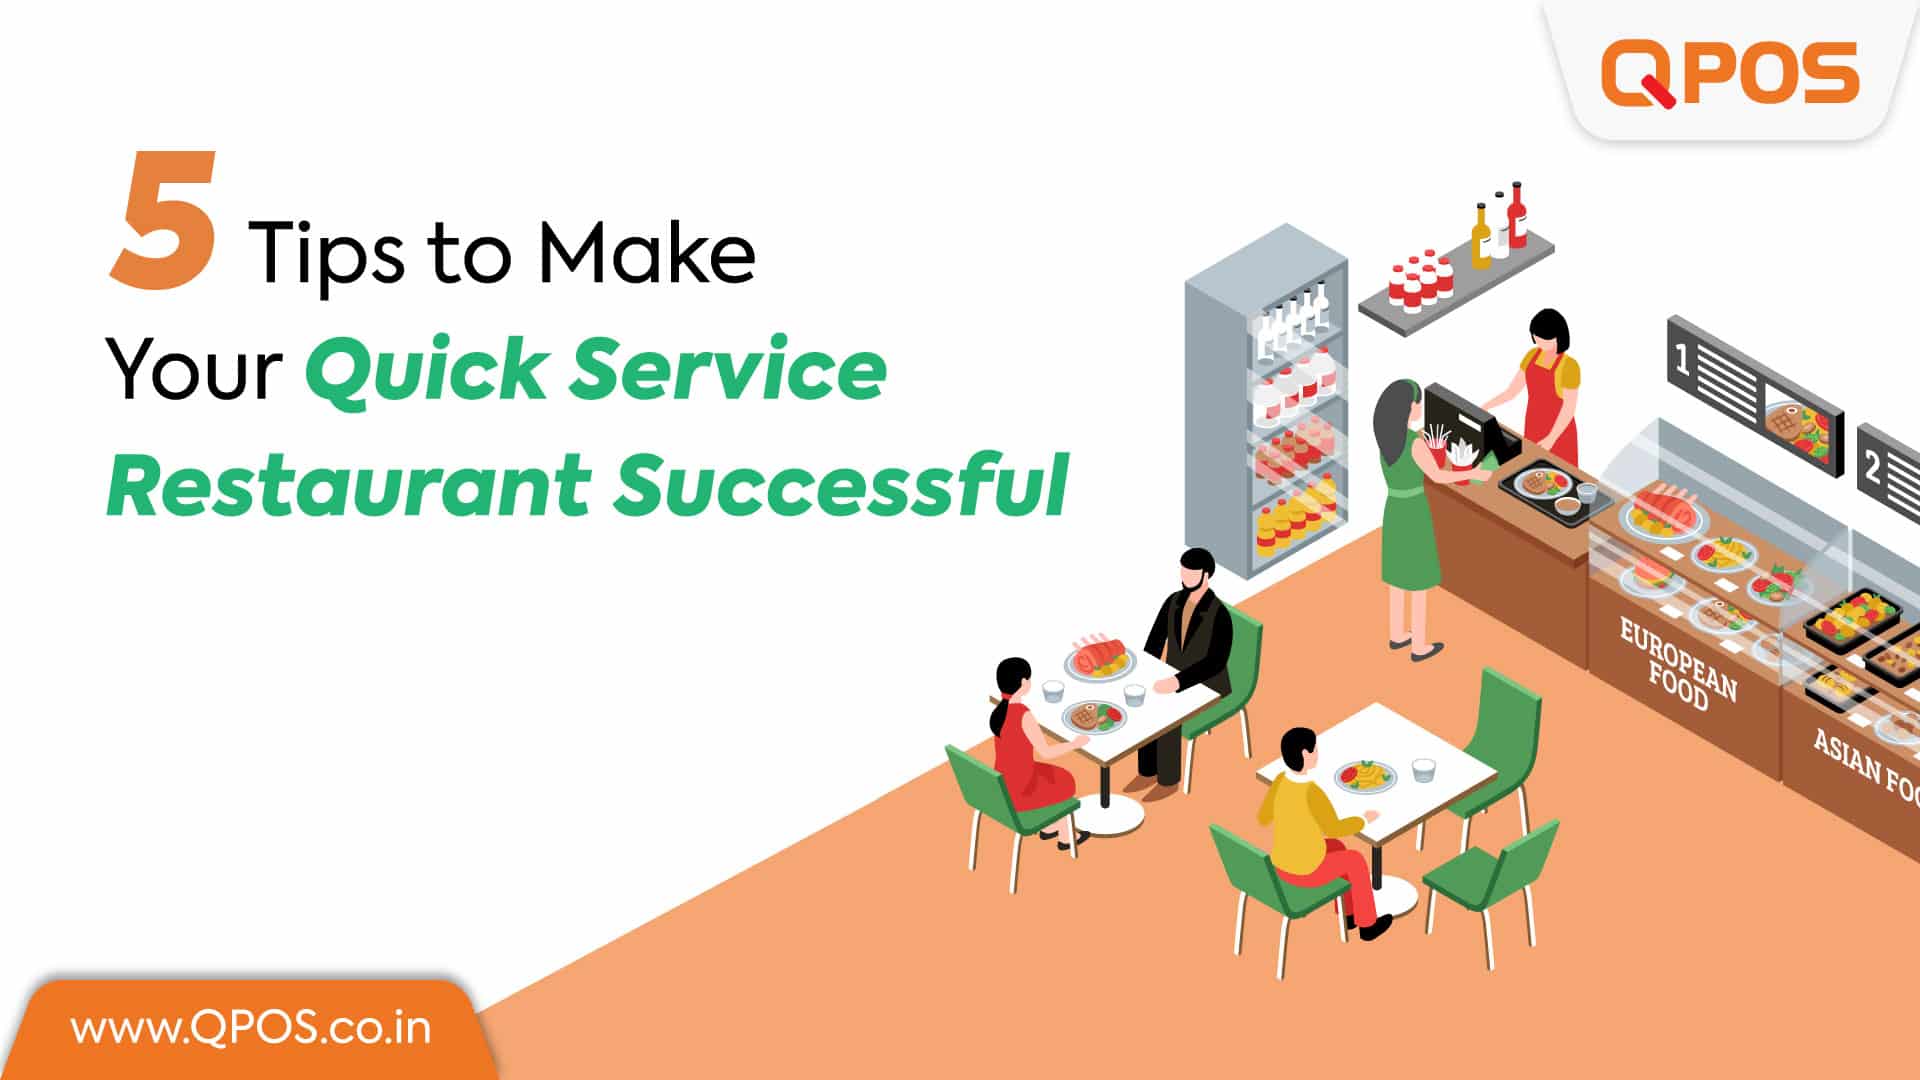 QPOS-5 Tips to Make Your Quick Service Restaurant Successful